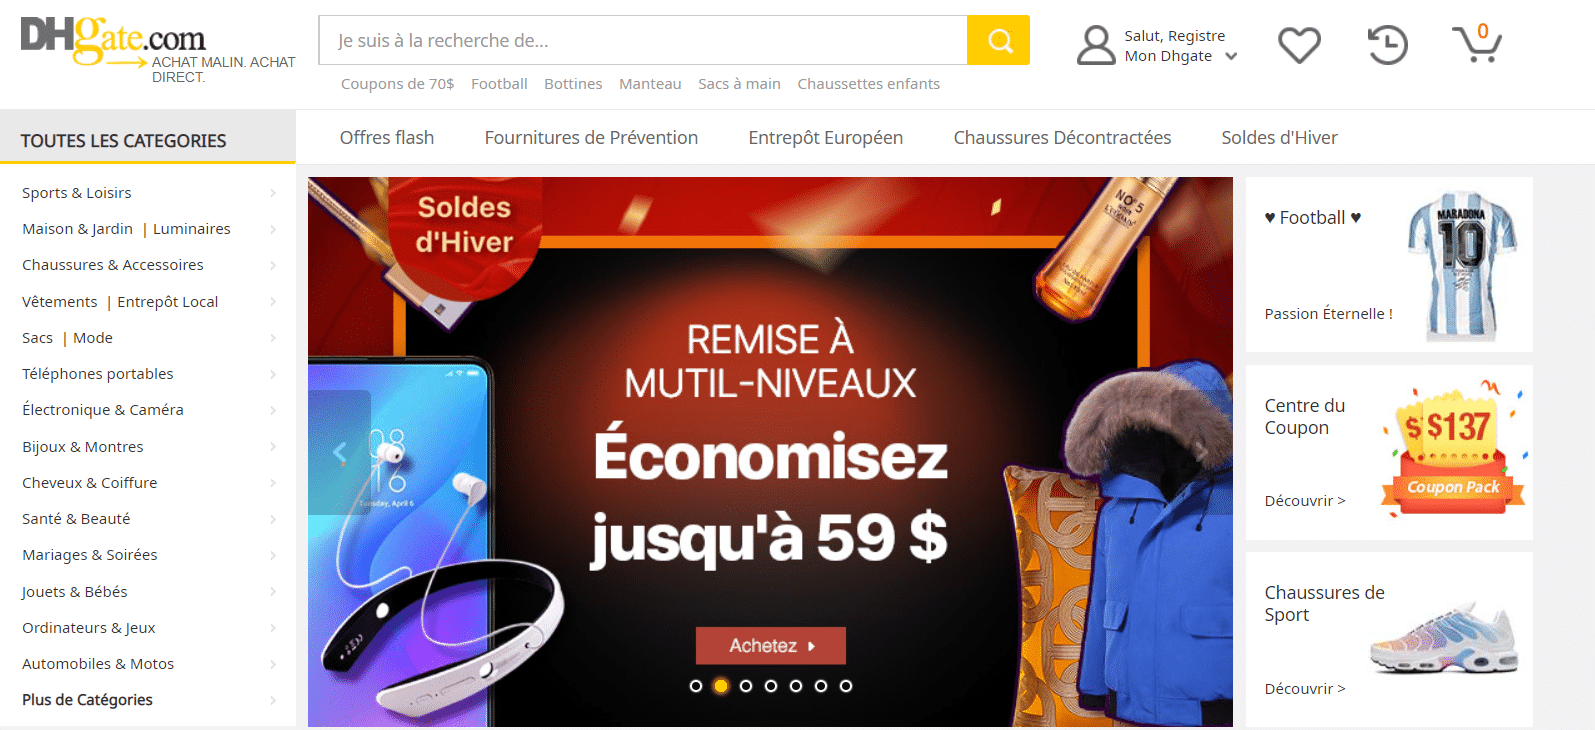 page accueil dhgate boutique chinoise